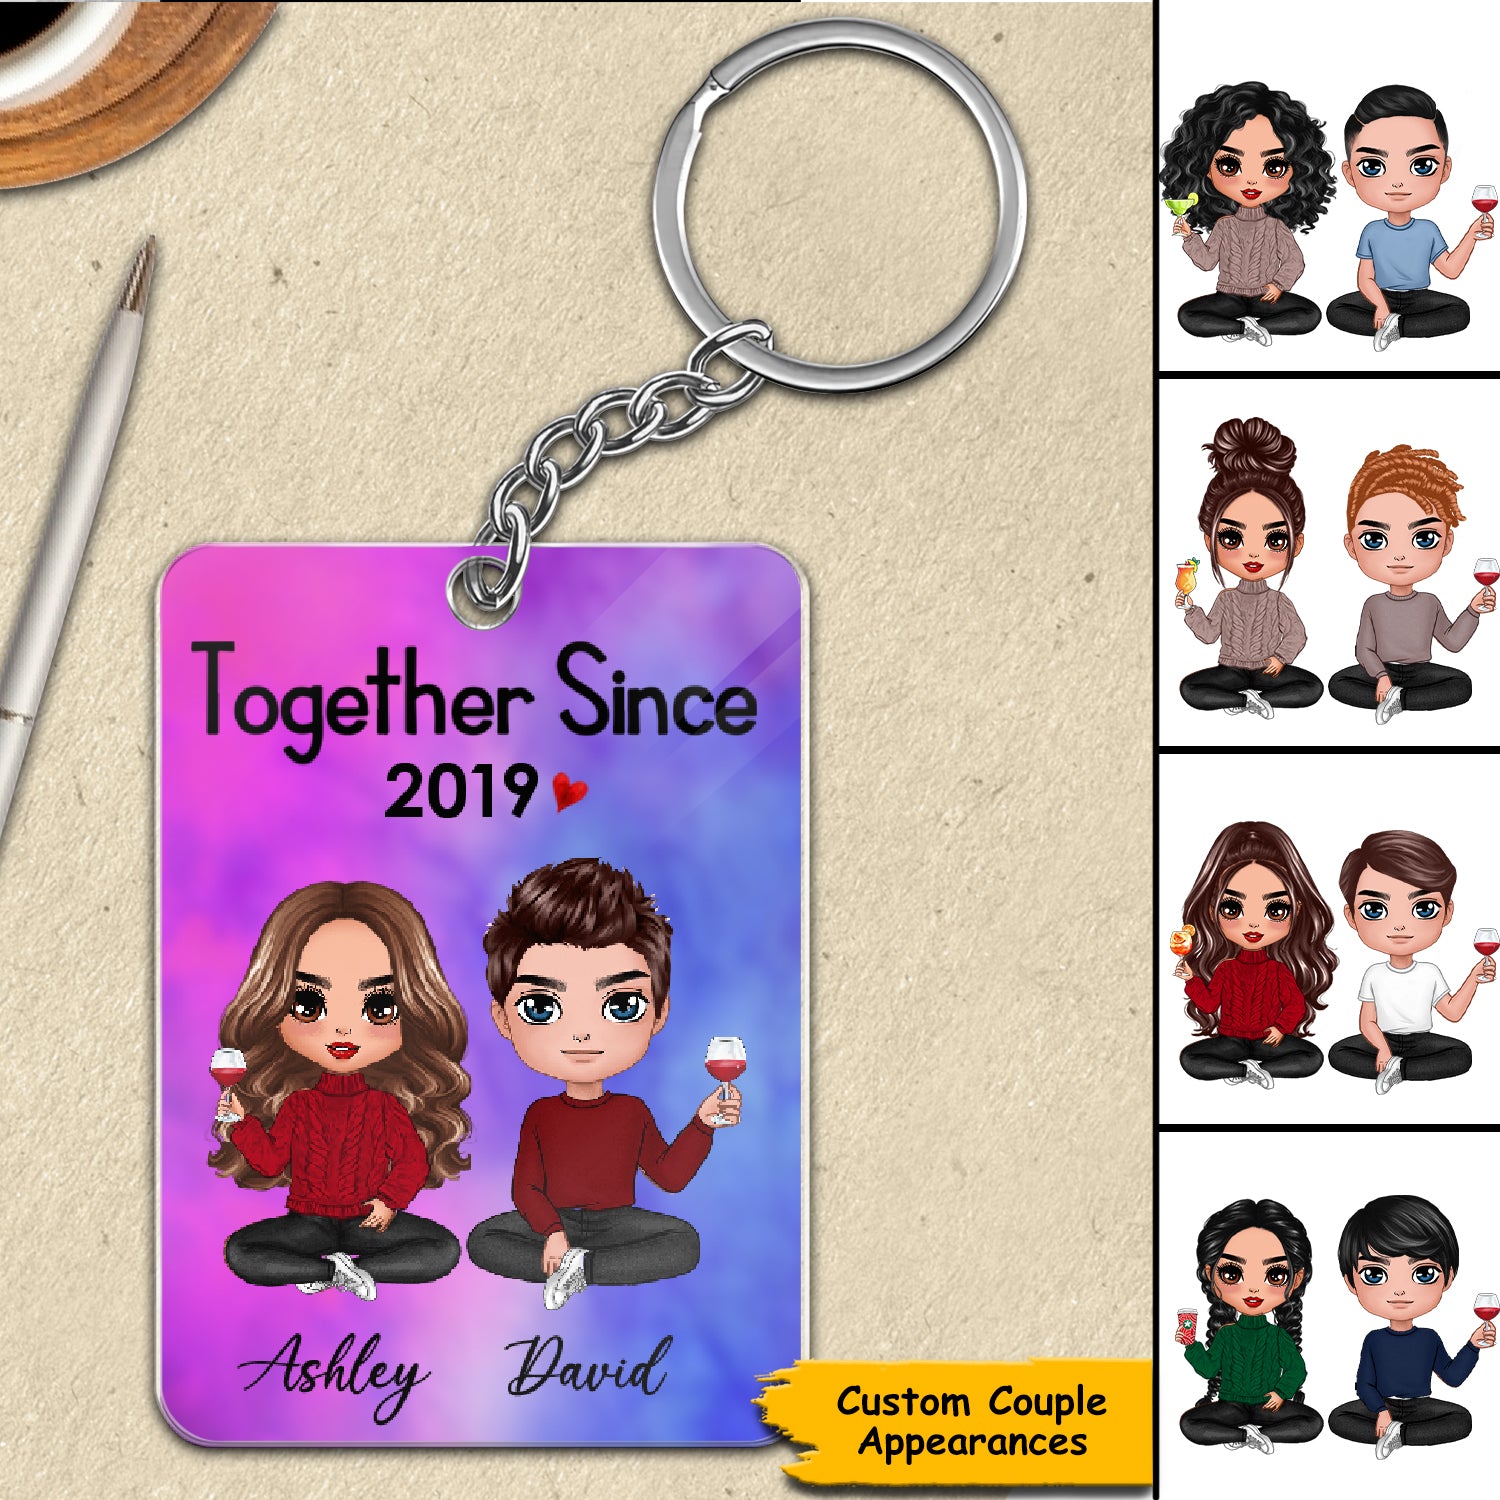 Doll Couple Sitting Gift For Him For Her Personalized Keychain ( Galaxy ver. )